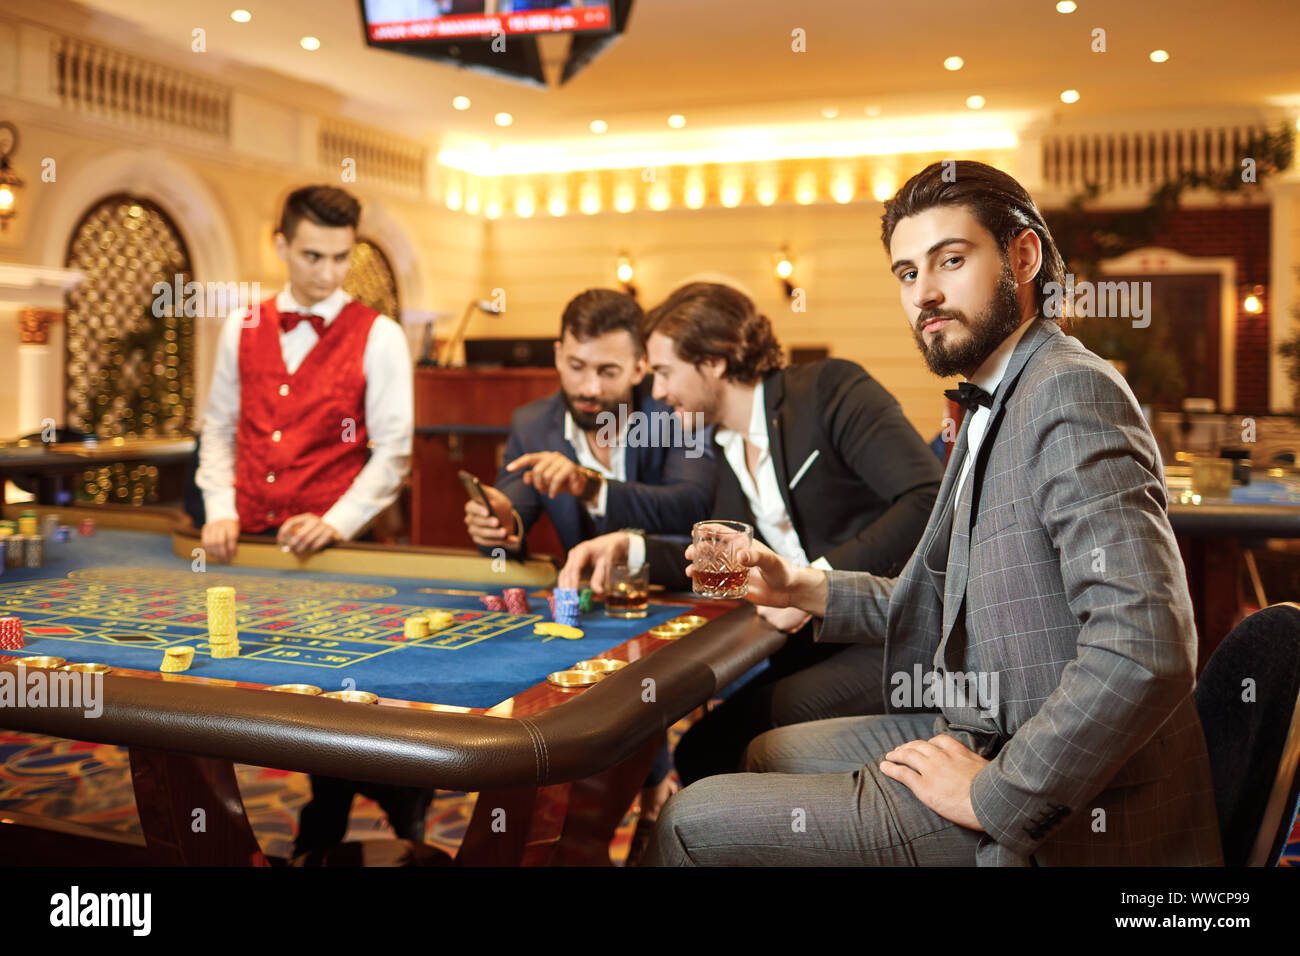 A man in a suit with a glass of whiskey sitting at table roulette playing poker at a casino. Stock Photo